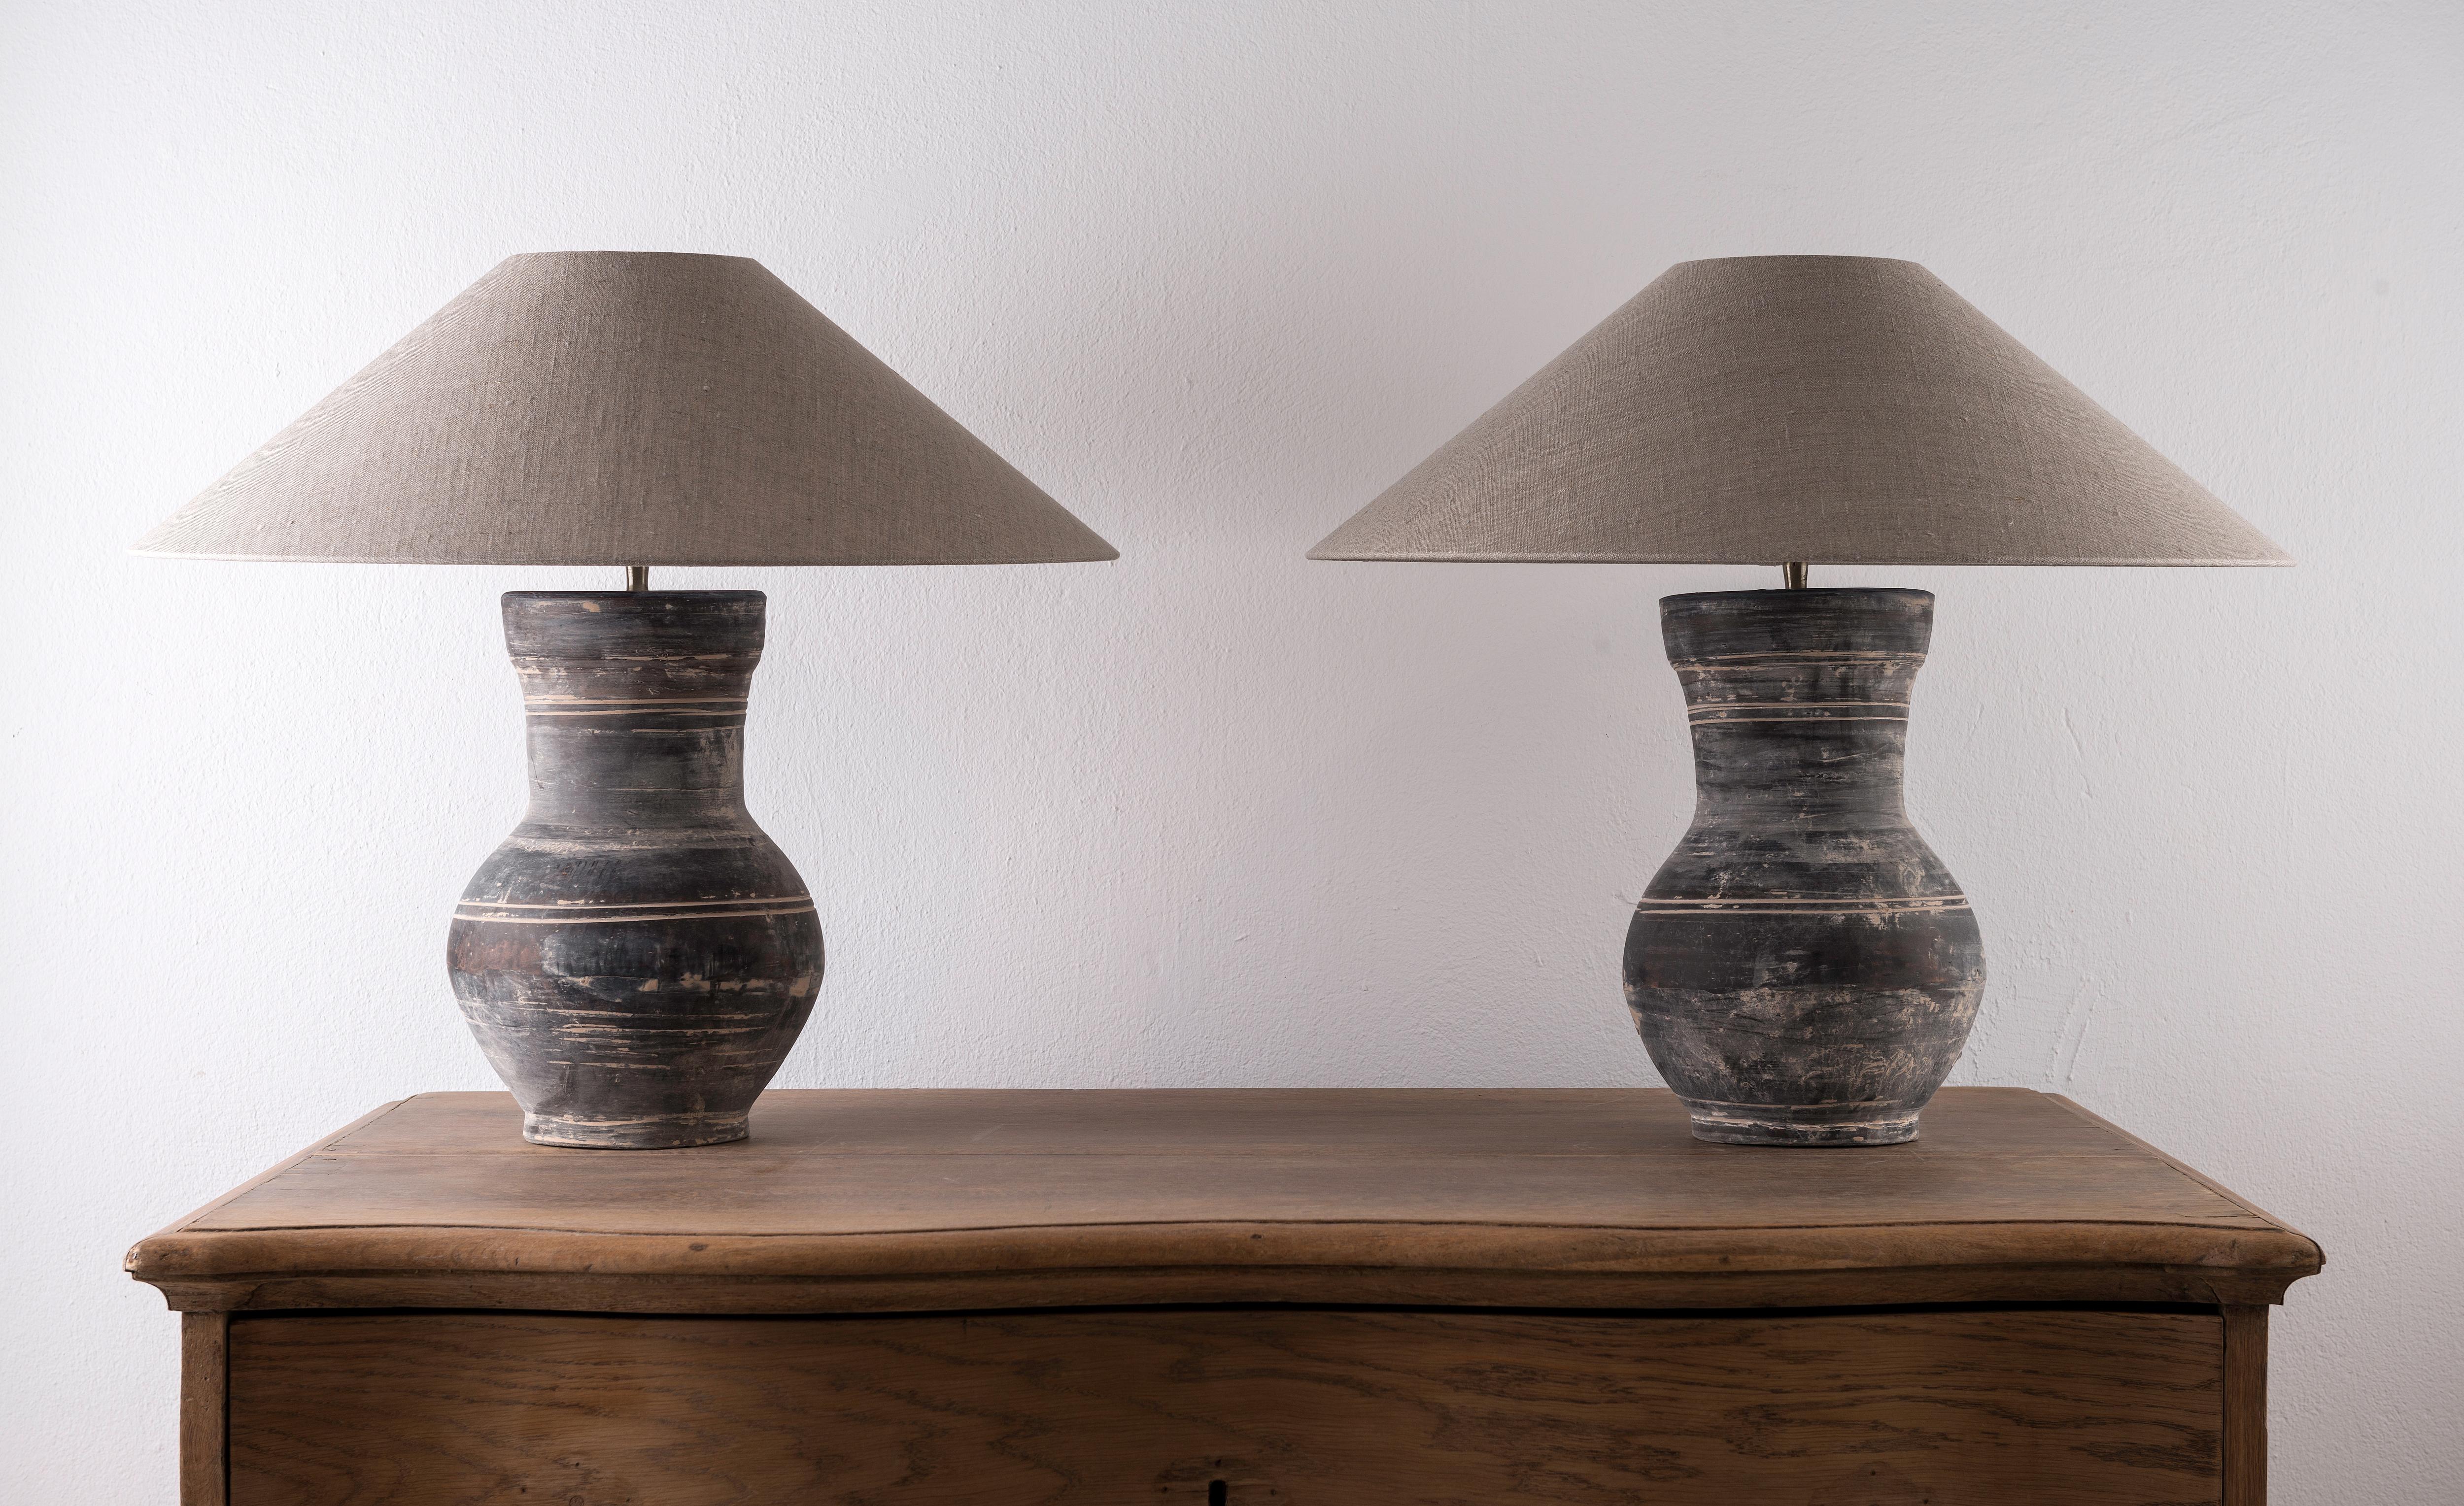 A beautiful pair of unglazed Han dynasty style vases of a very elegant form.
Expectedly mounted as lamps. High quality mount with a brass adjustable pivot joint. Shade handmade in Belgium.
The vases are from Zhejiang, china, mount and shade are made